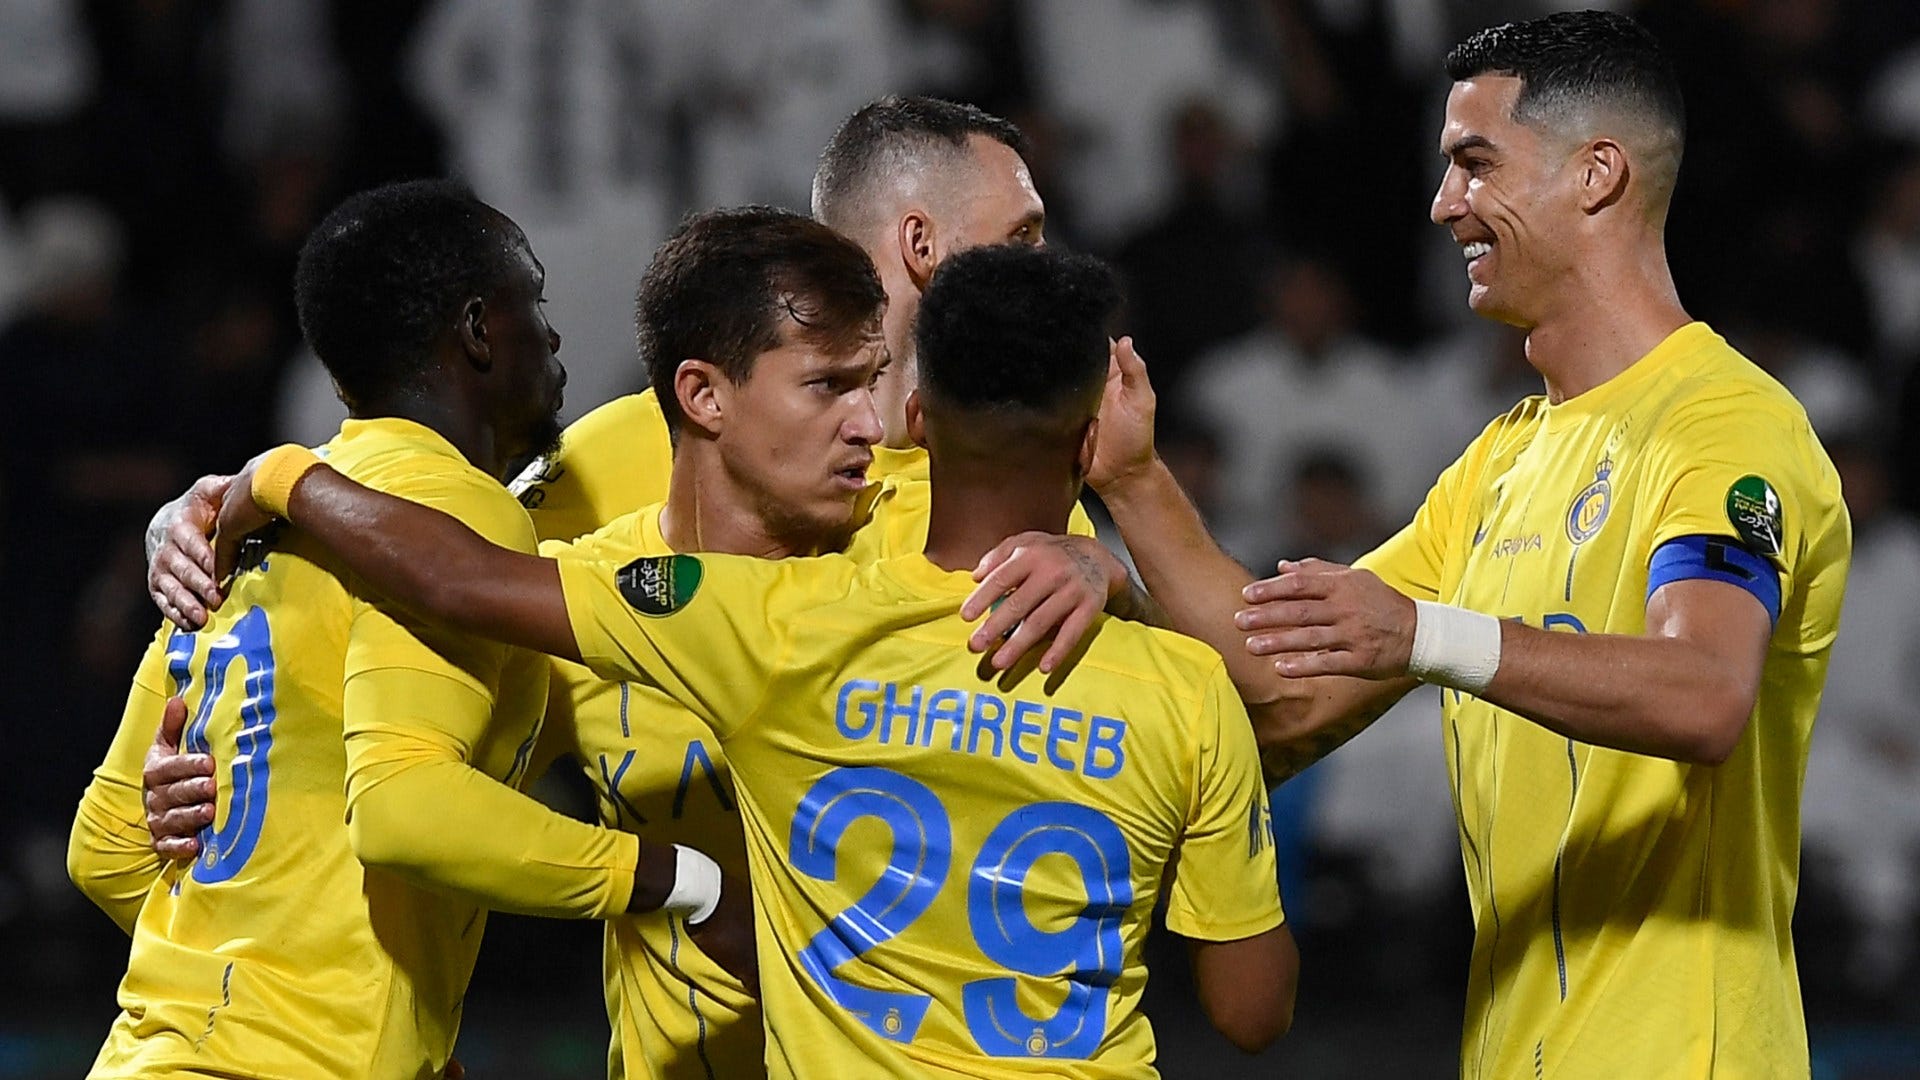 Watch Cristiano Ronaldo score first free-kick in THREE YEARS from 30 yards  out to spark incredible Al Nassr comeback win